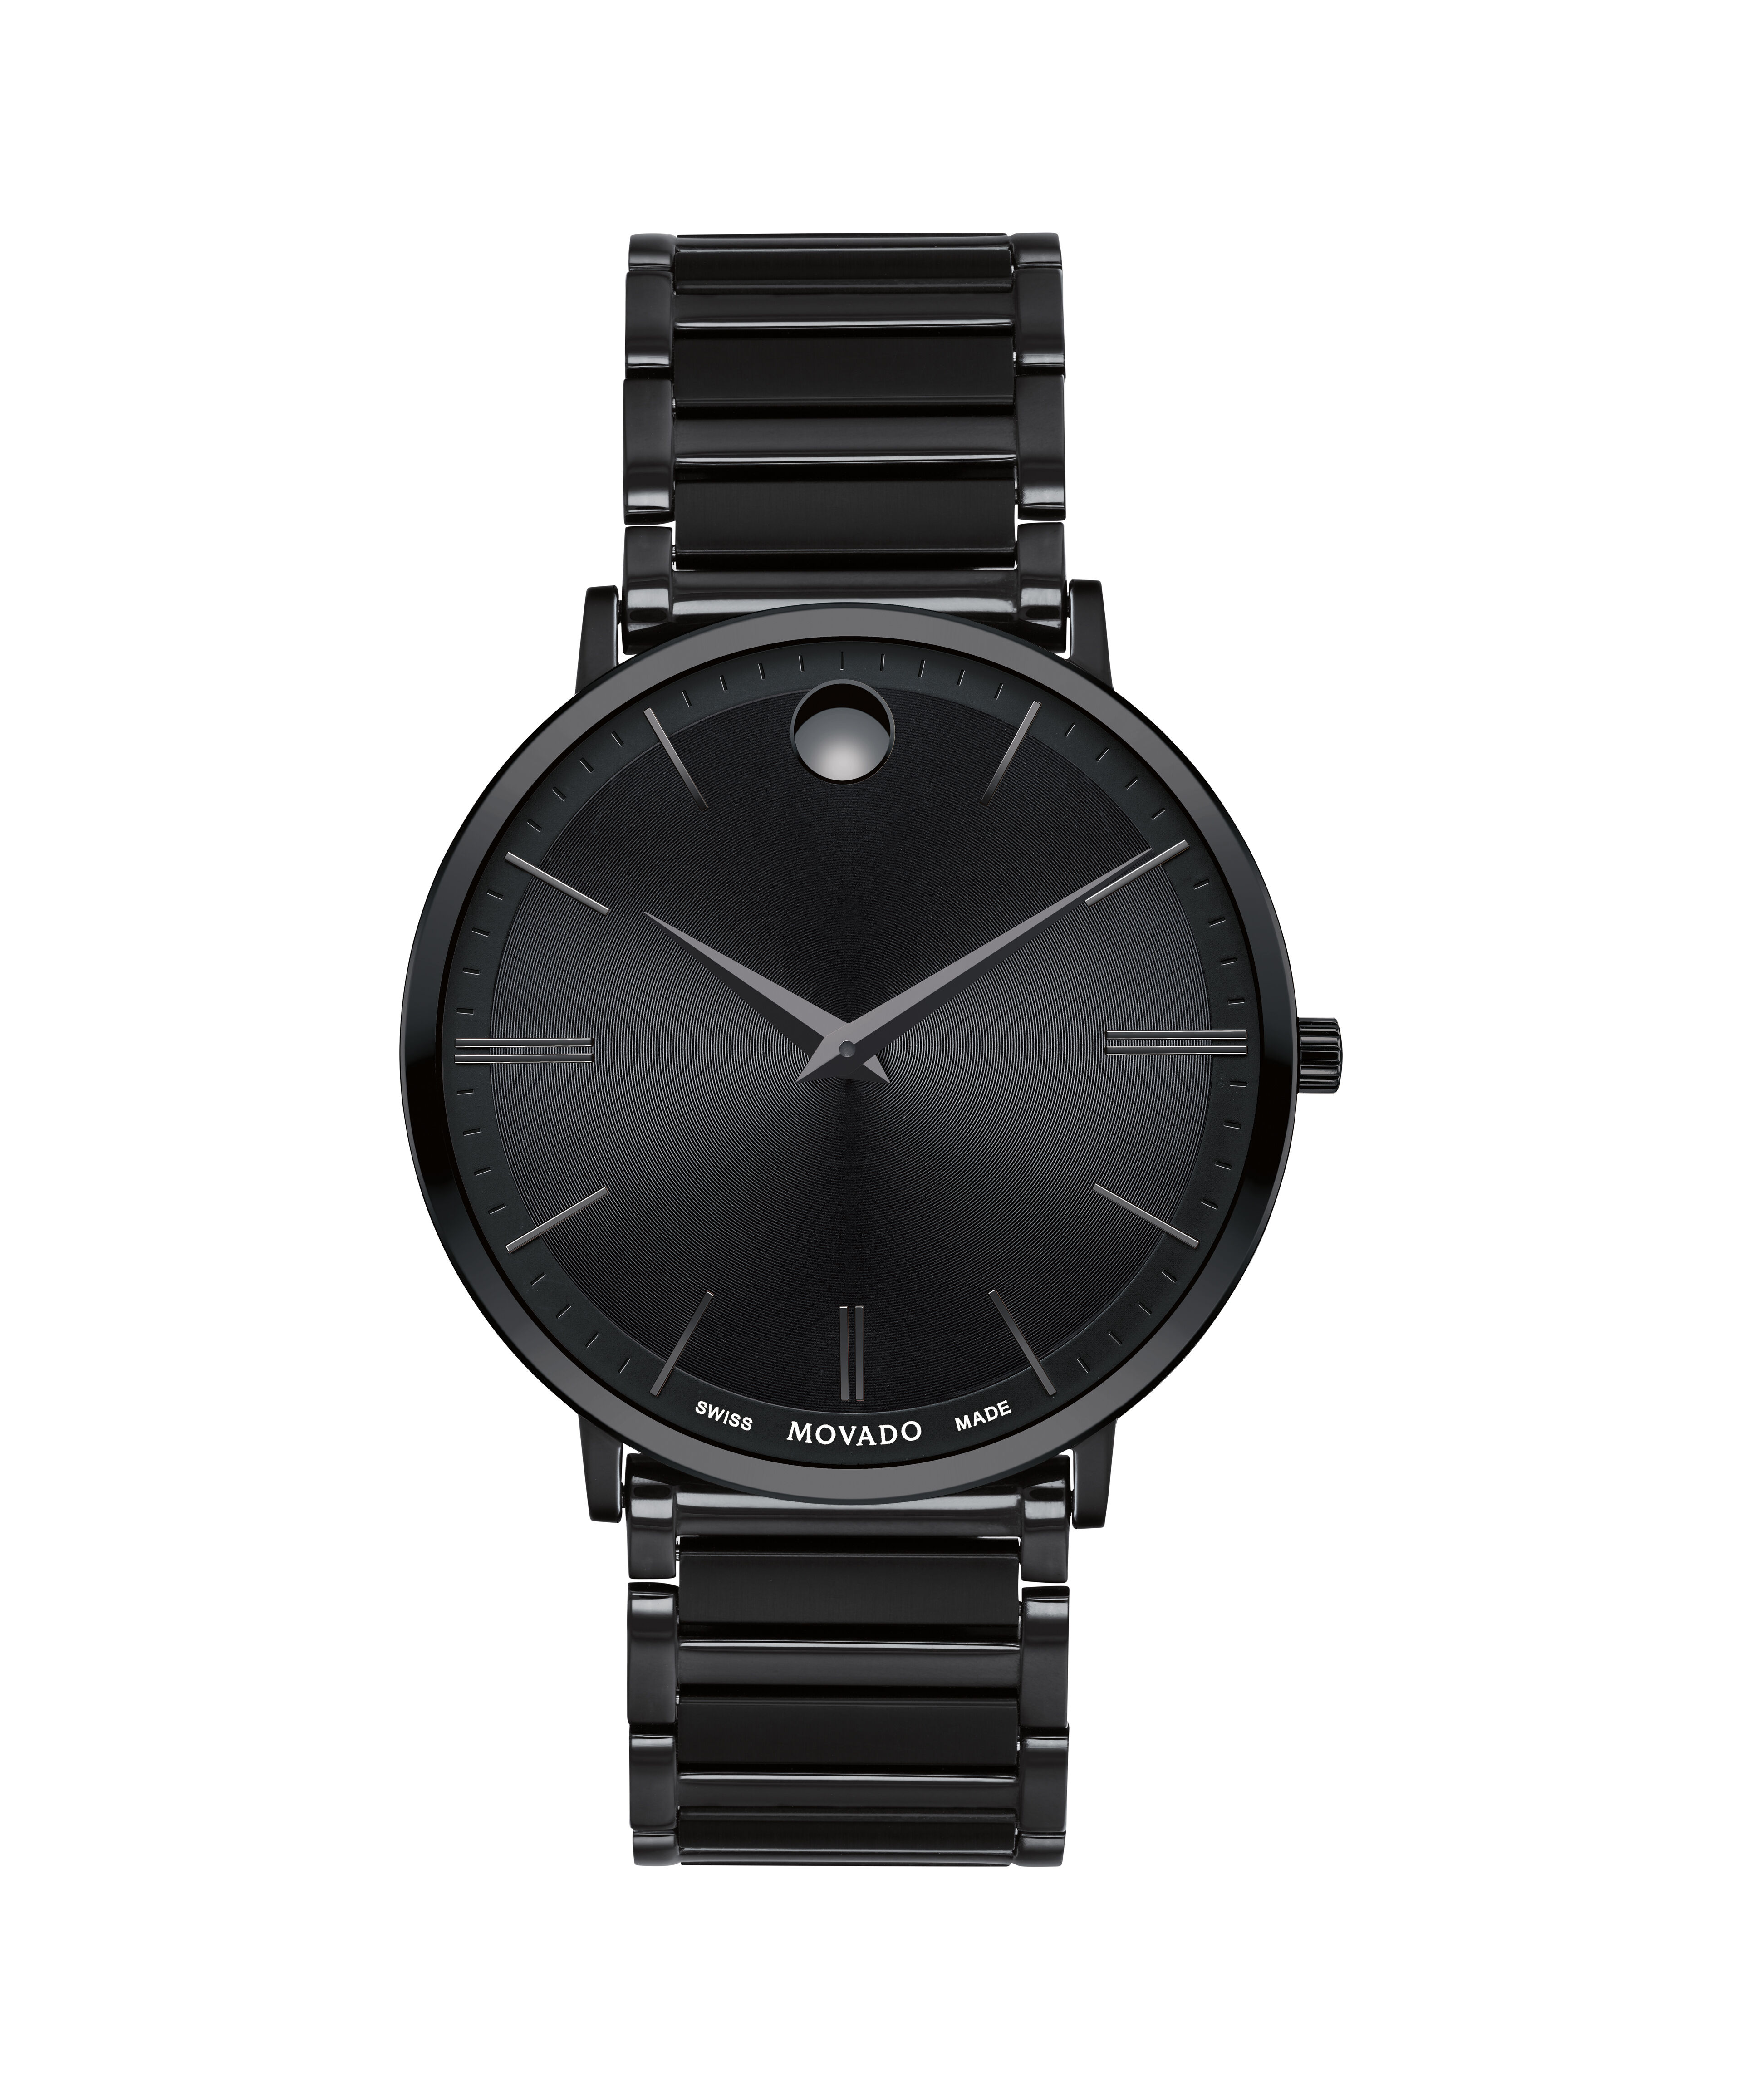 Movado Circa Chronograph 0606803 42mm Stainless Steel Black Dial WatchMovado Circa Chronograph Black Dial Men's Watch 0606803